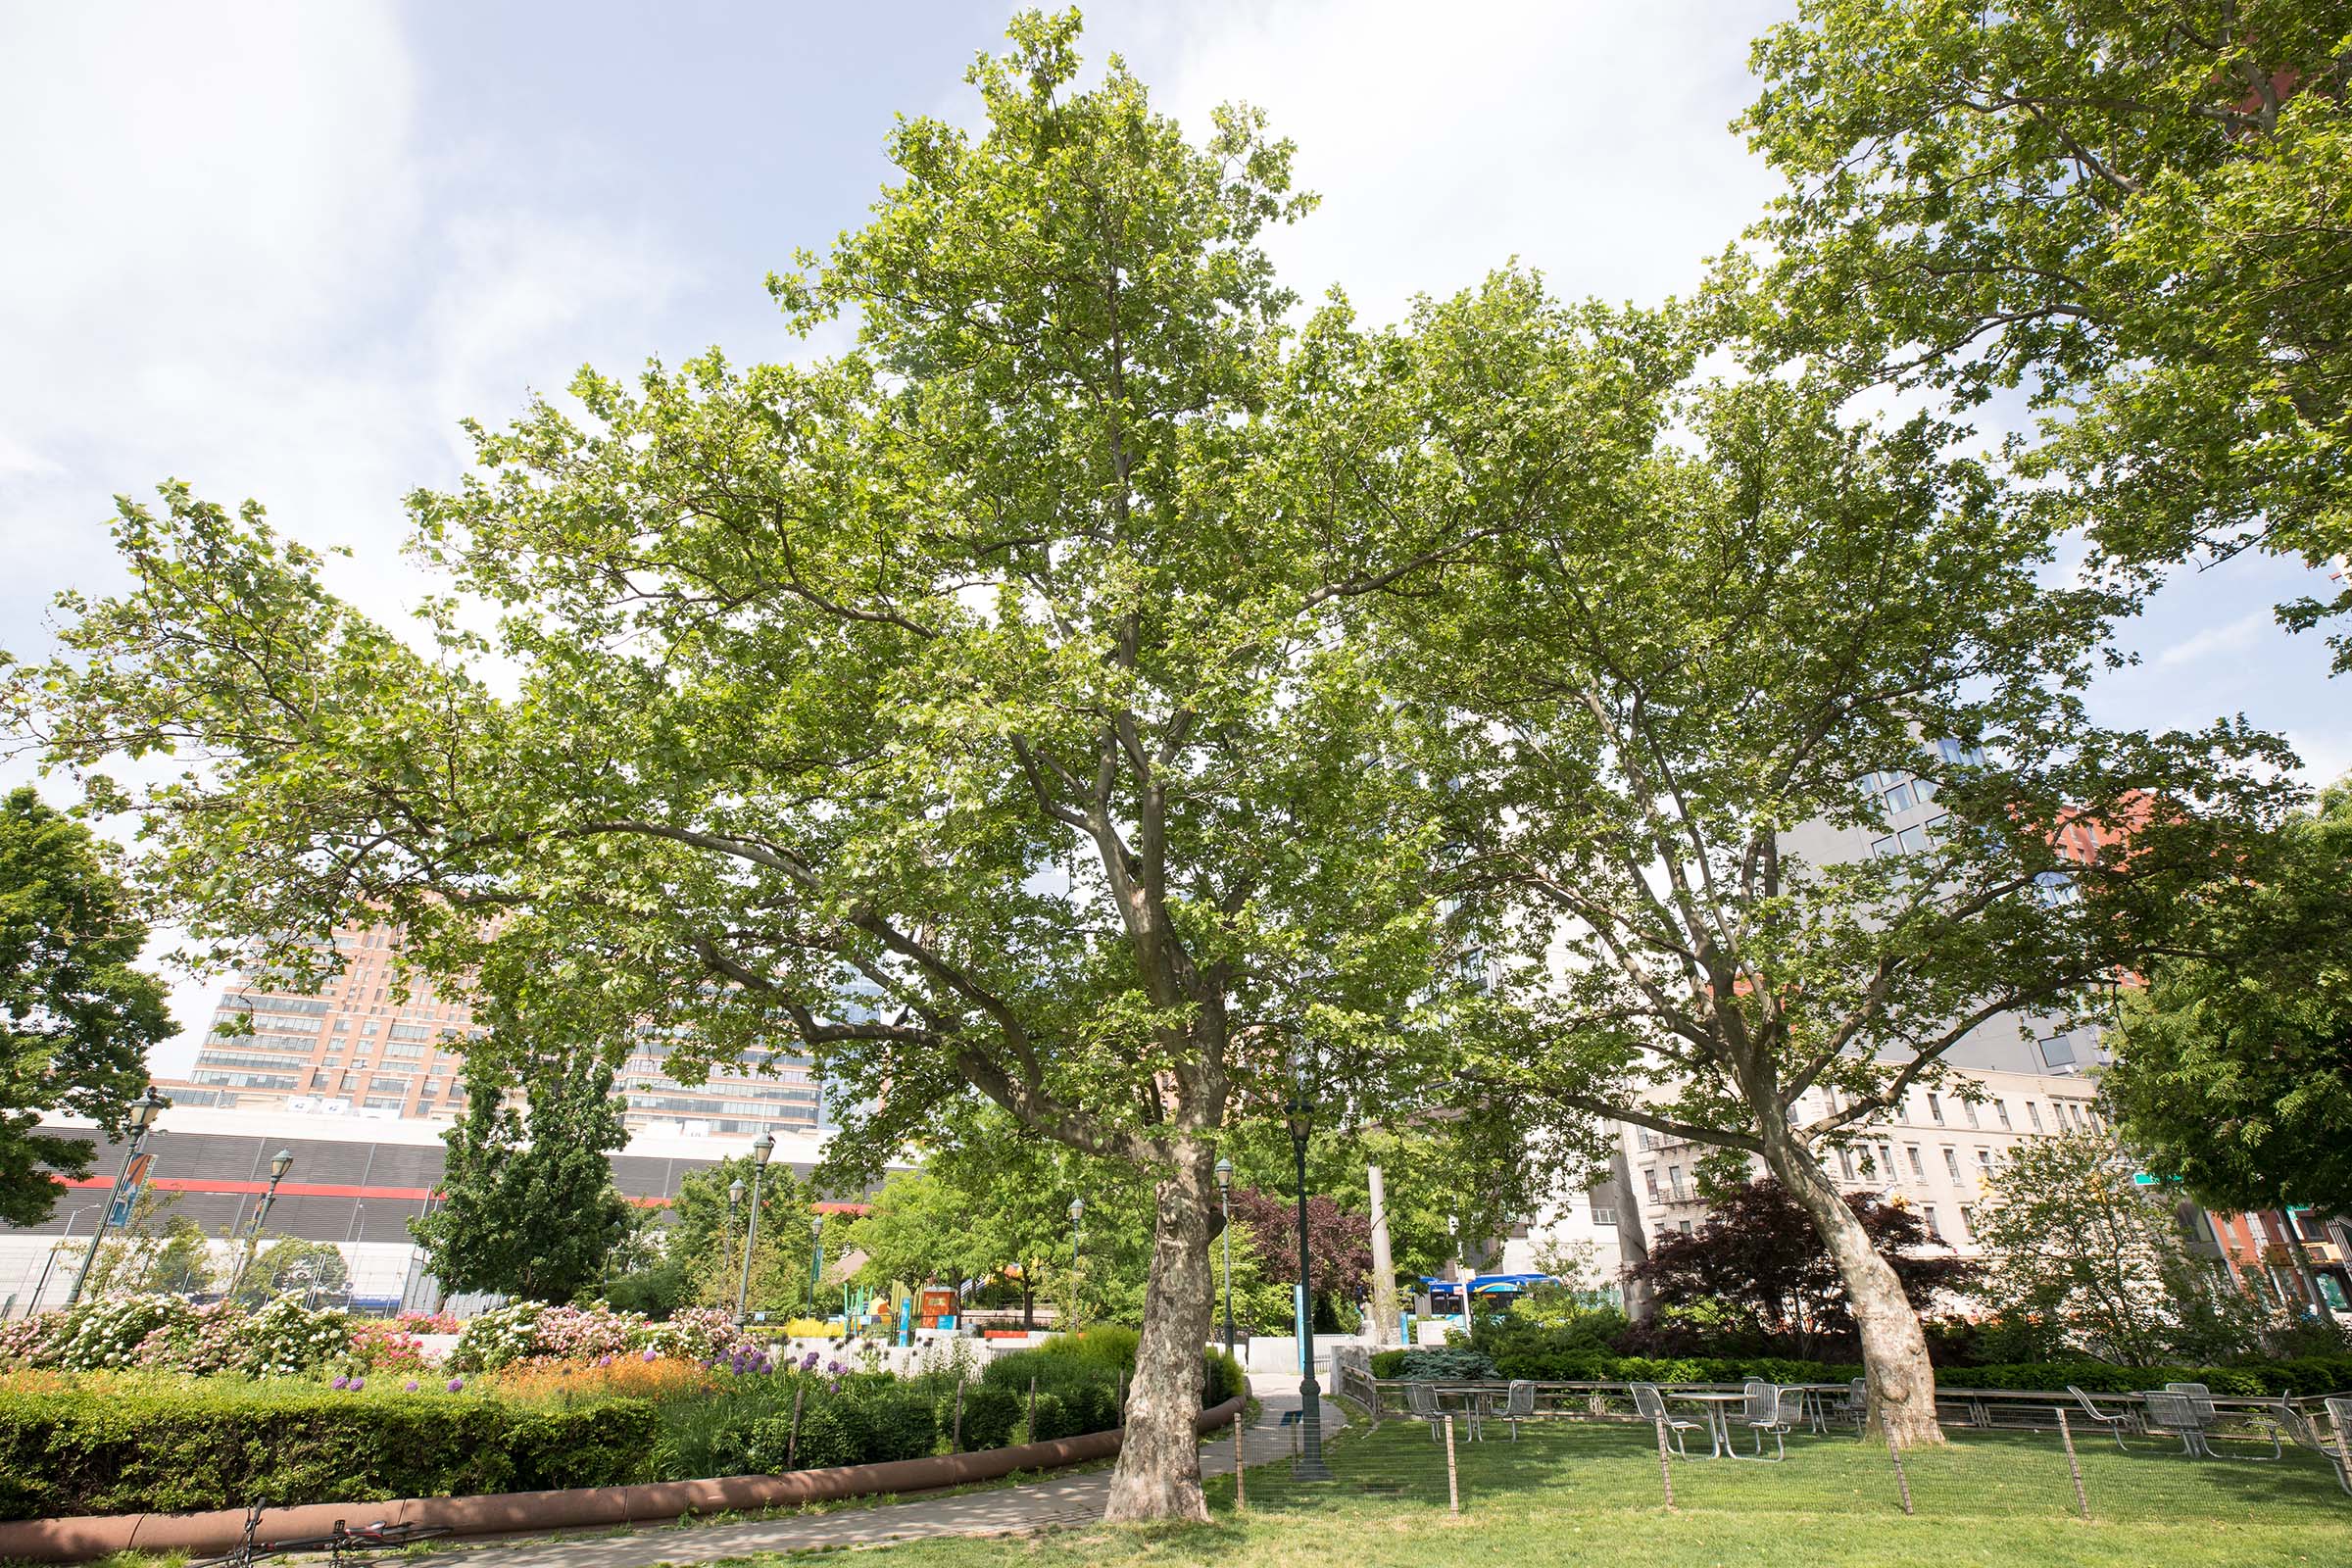 The London Plane Trees have a huge mass of green leaves providing an abundance of shade